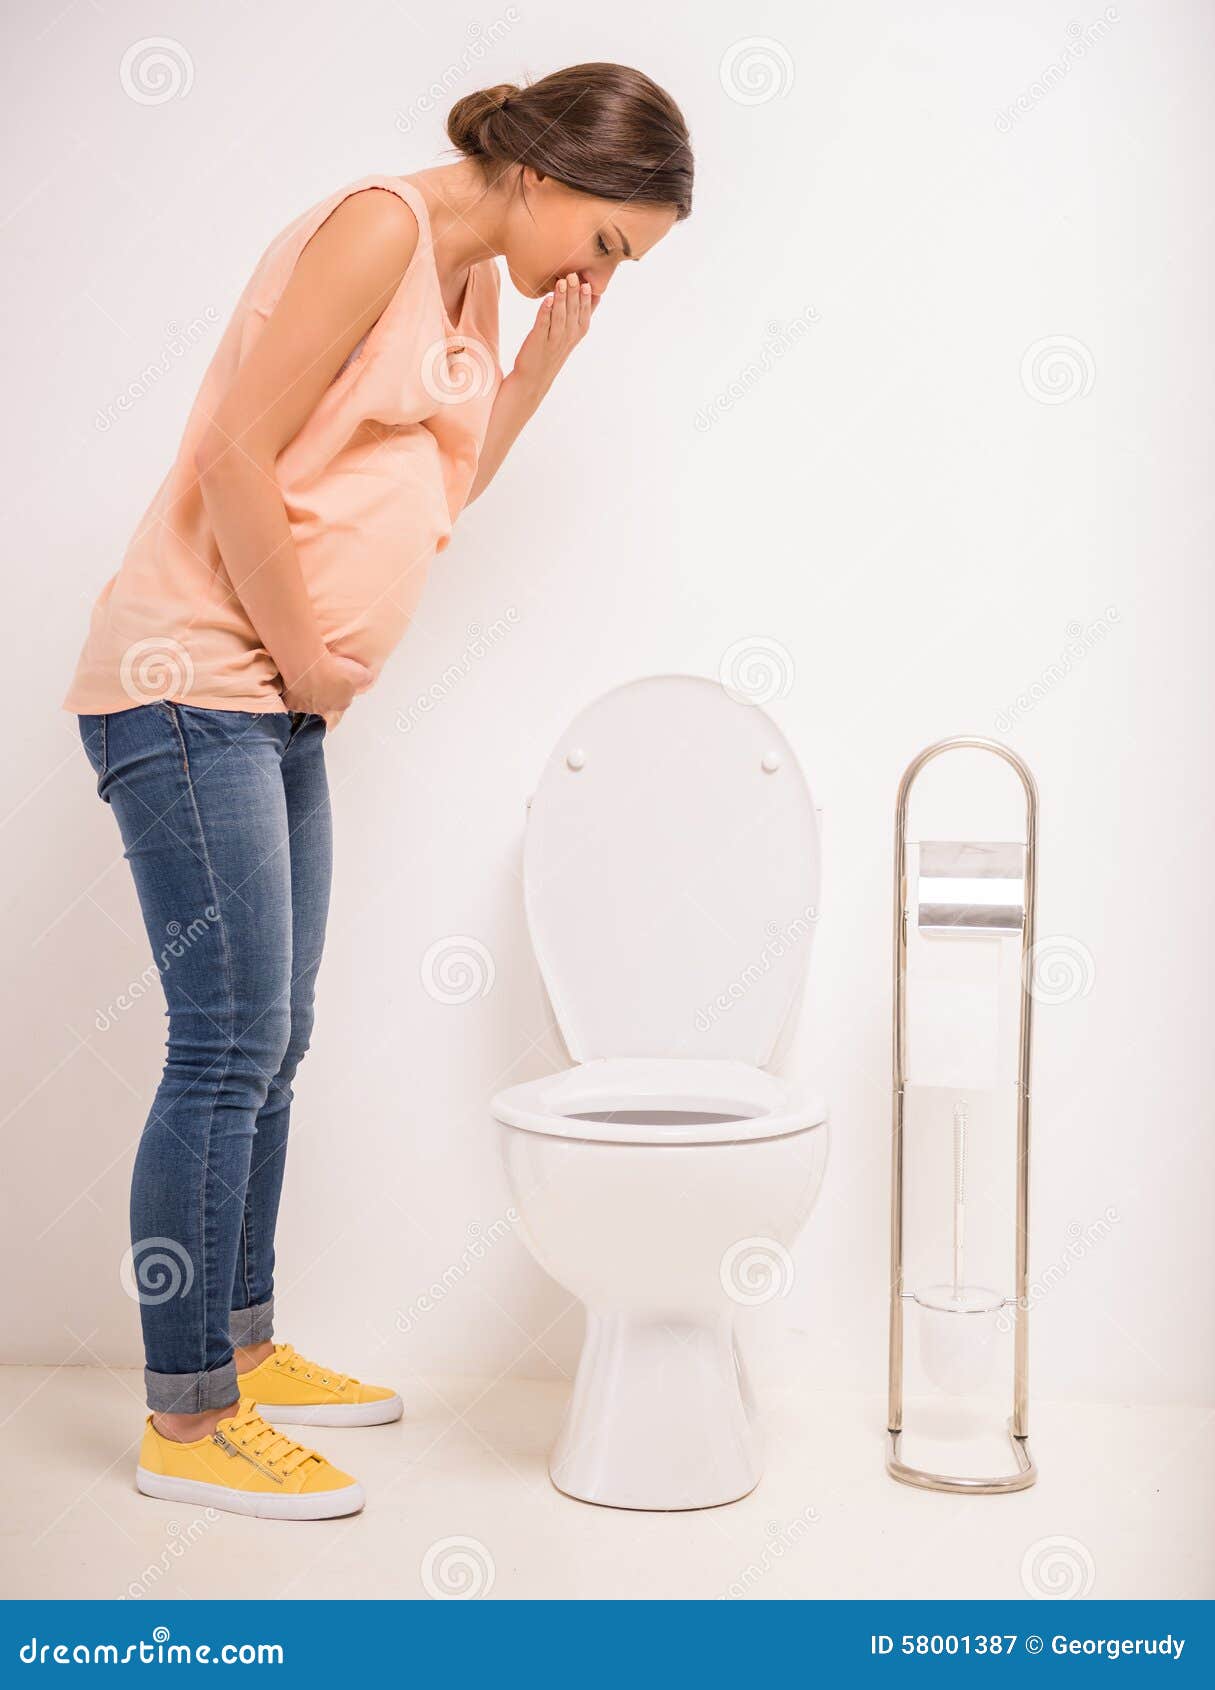 Woman In Toilet Stock Photo - Image: 58001387